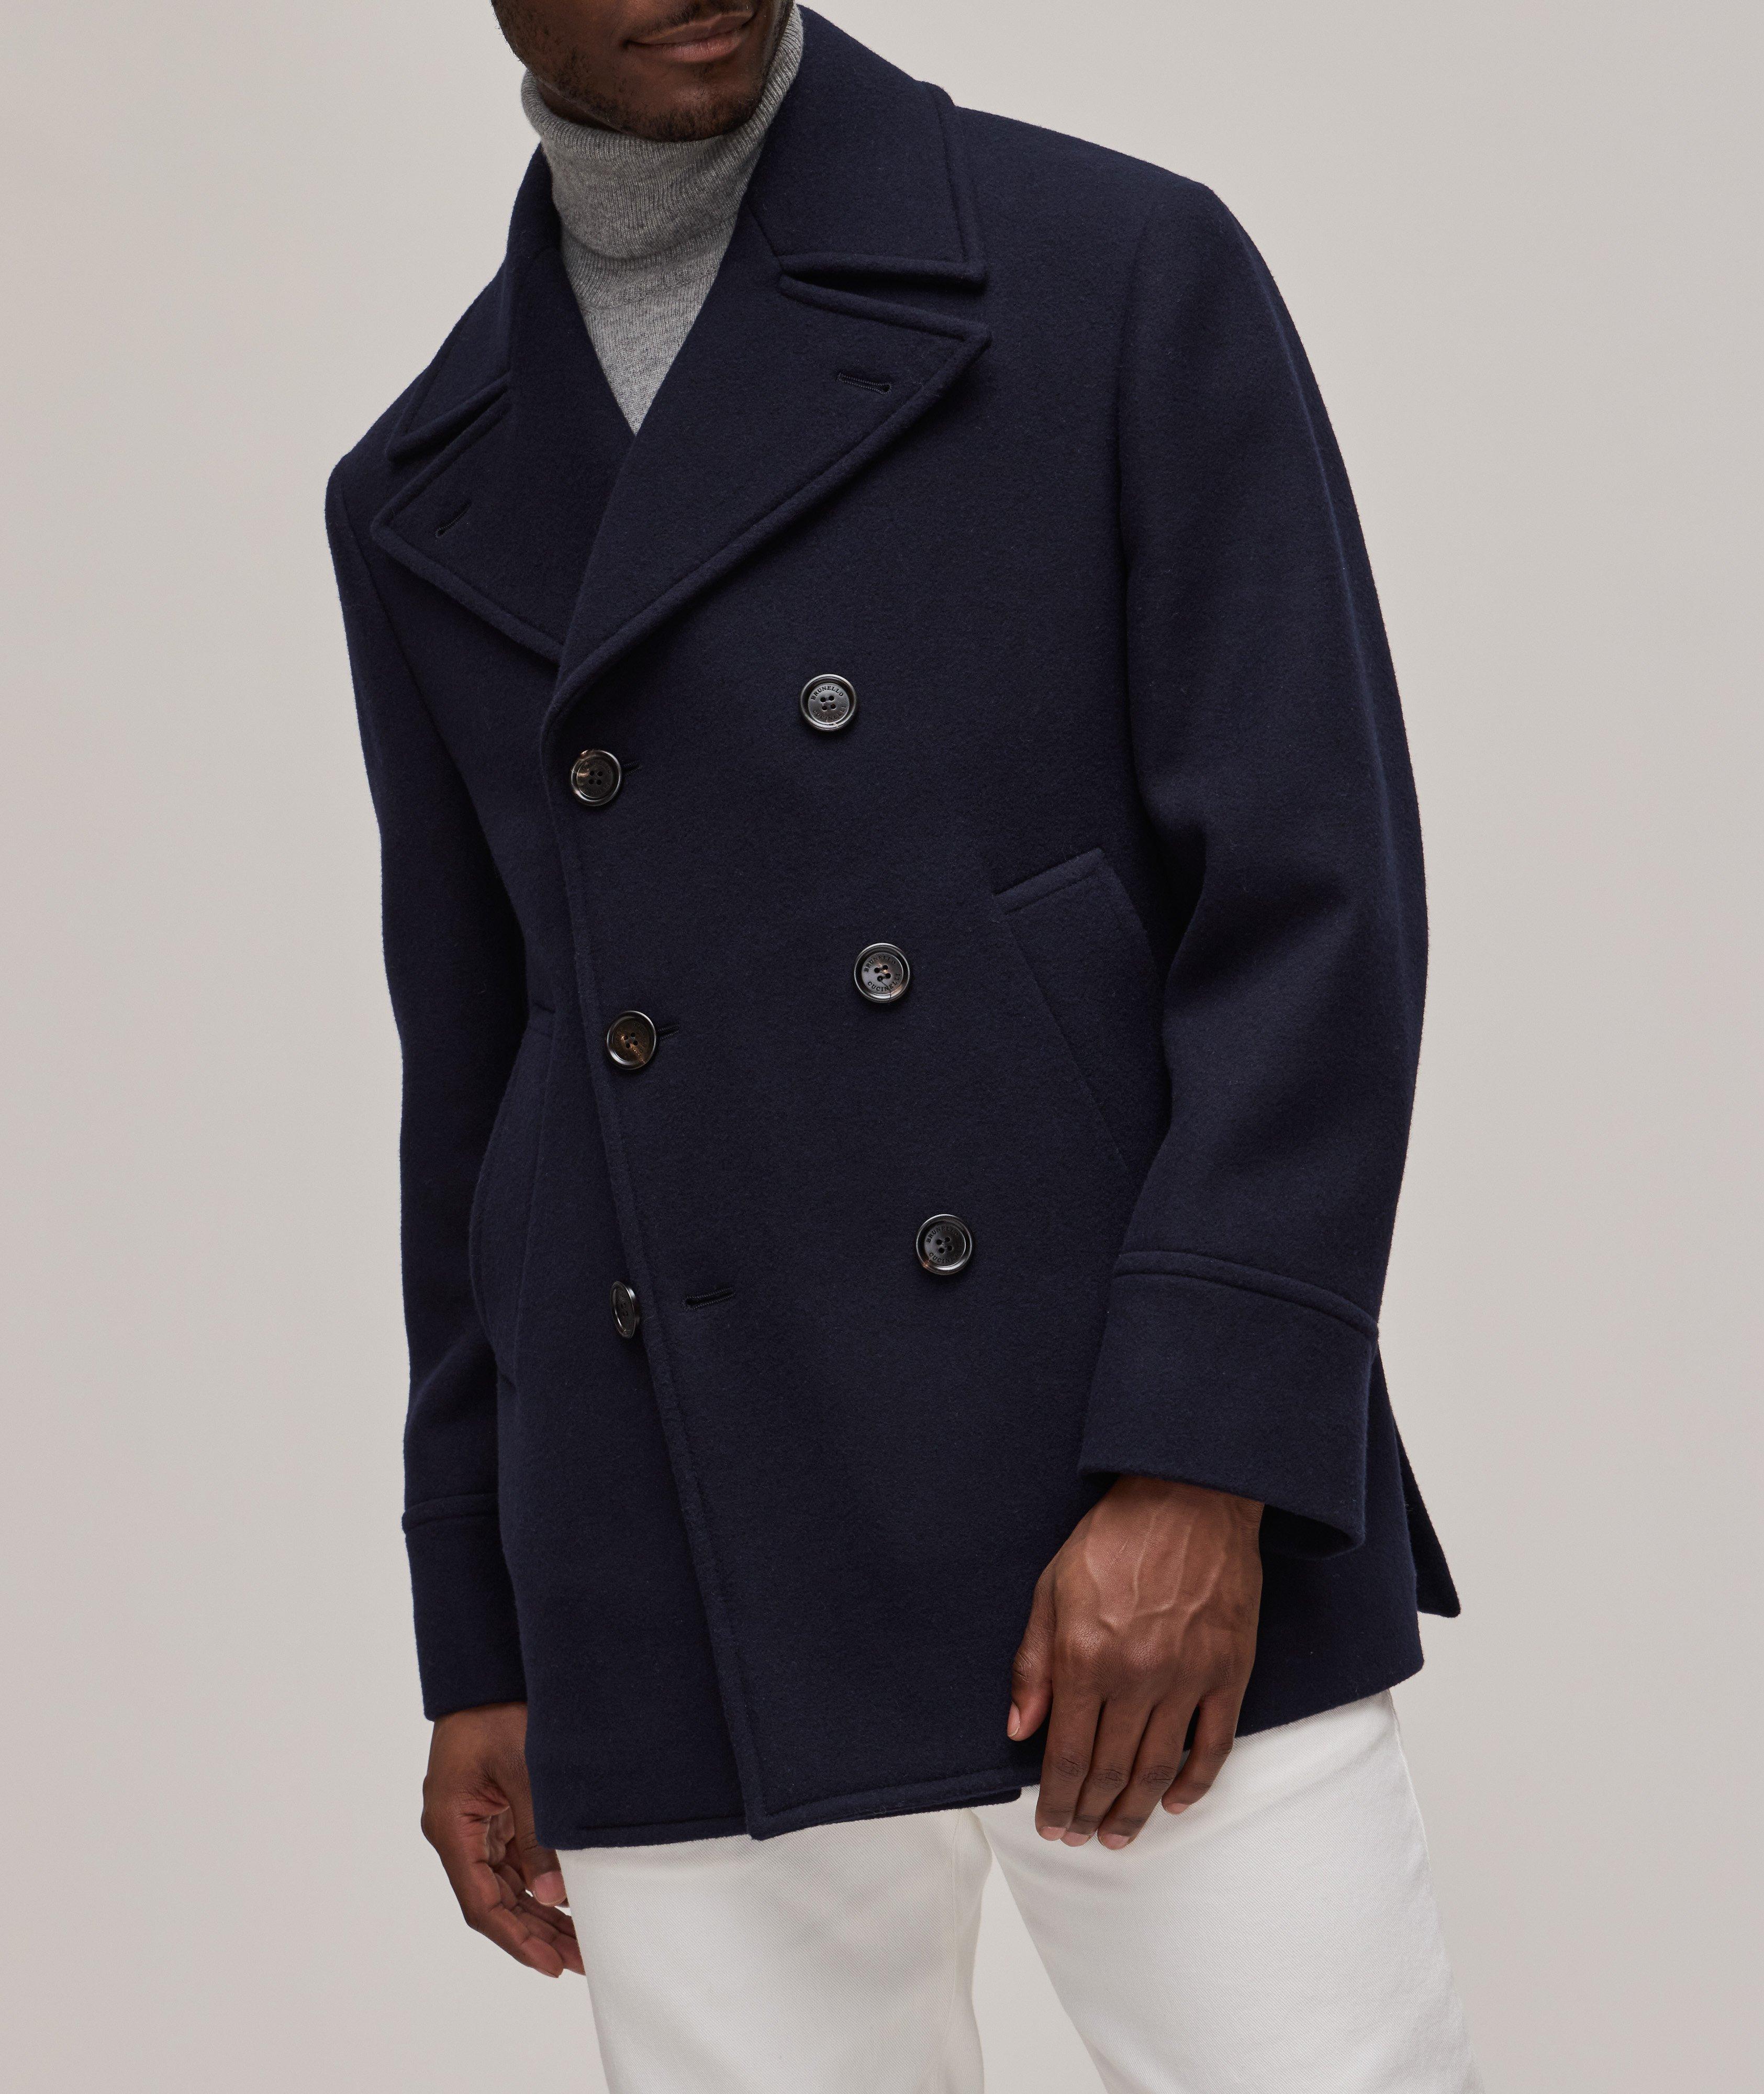 Wool-Cashmere Double Breasted Pea Coat image 1